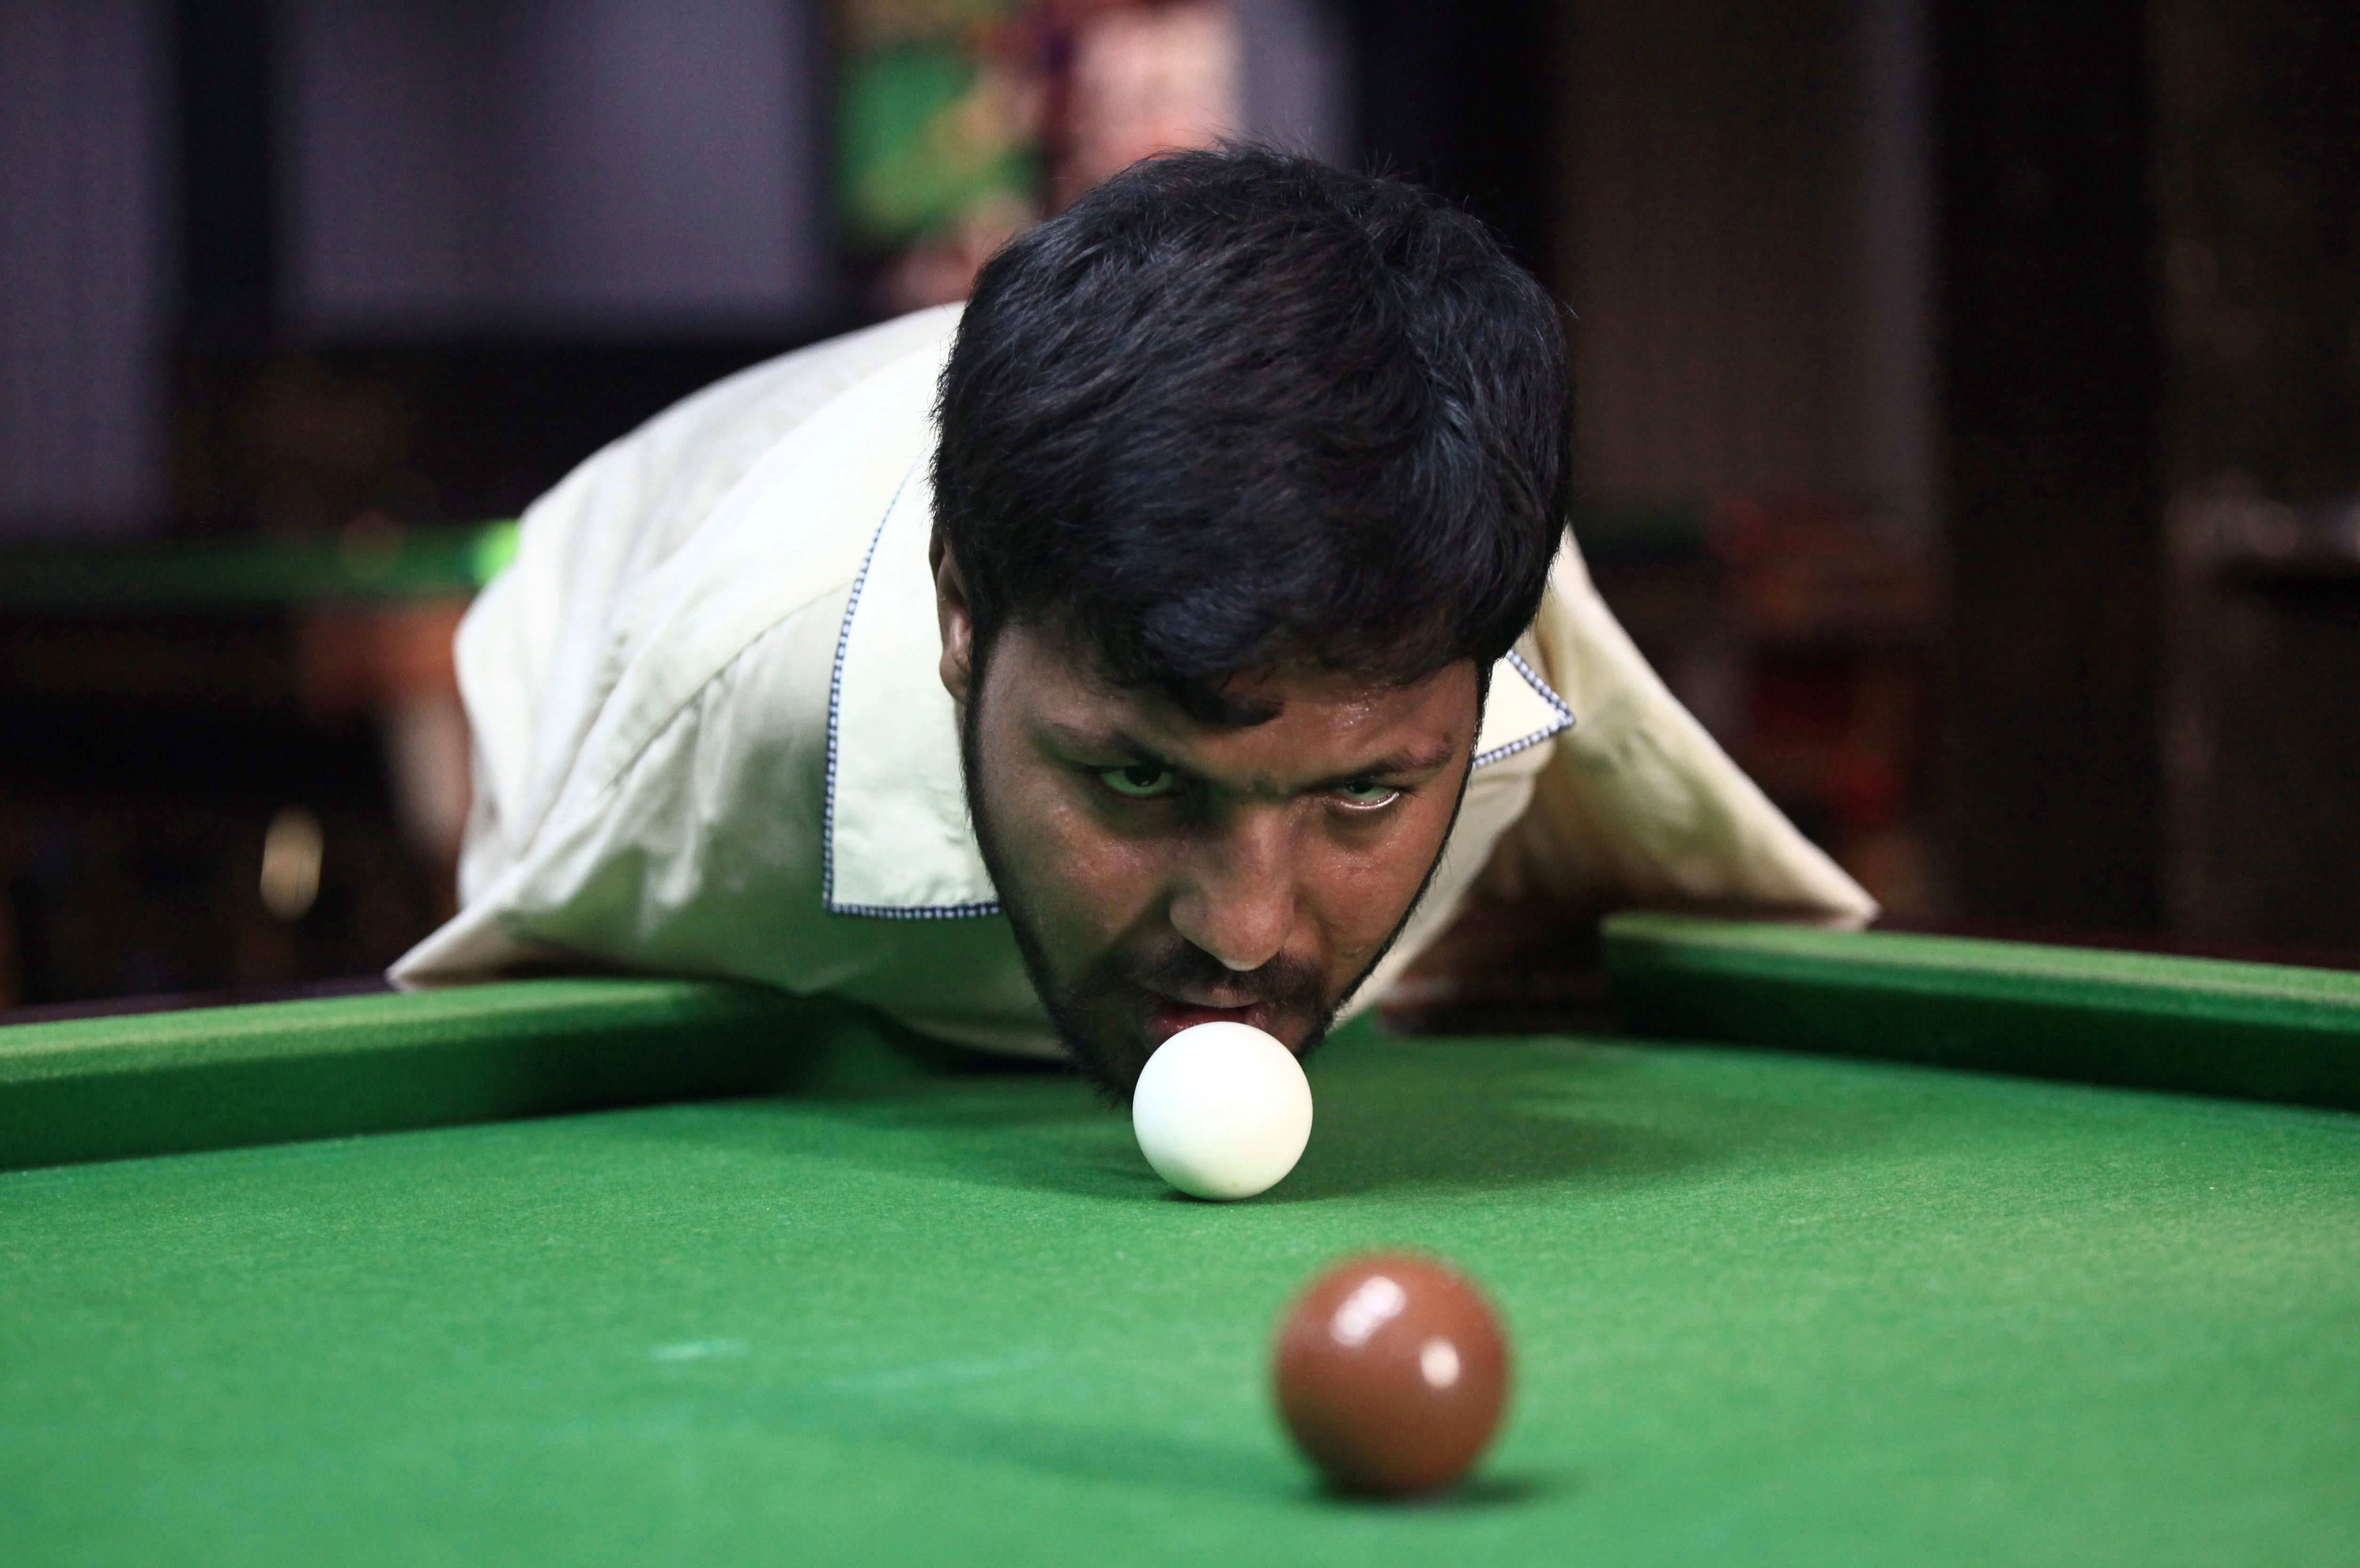 Muhammad Ikram, 32, who was born without arms, plays snooker with his chin at a local club in Samundri, Pakistan, October 20, 2020. Photo: Reuters